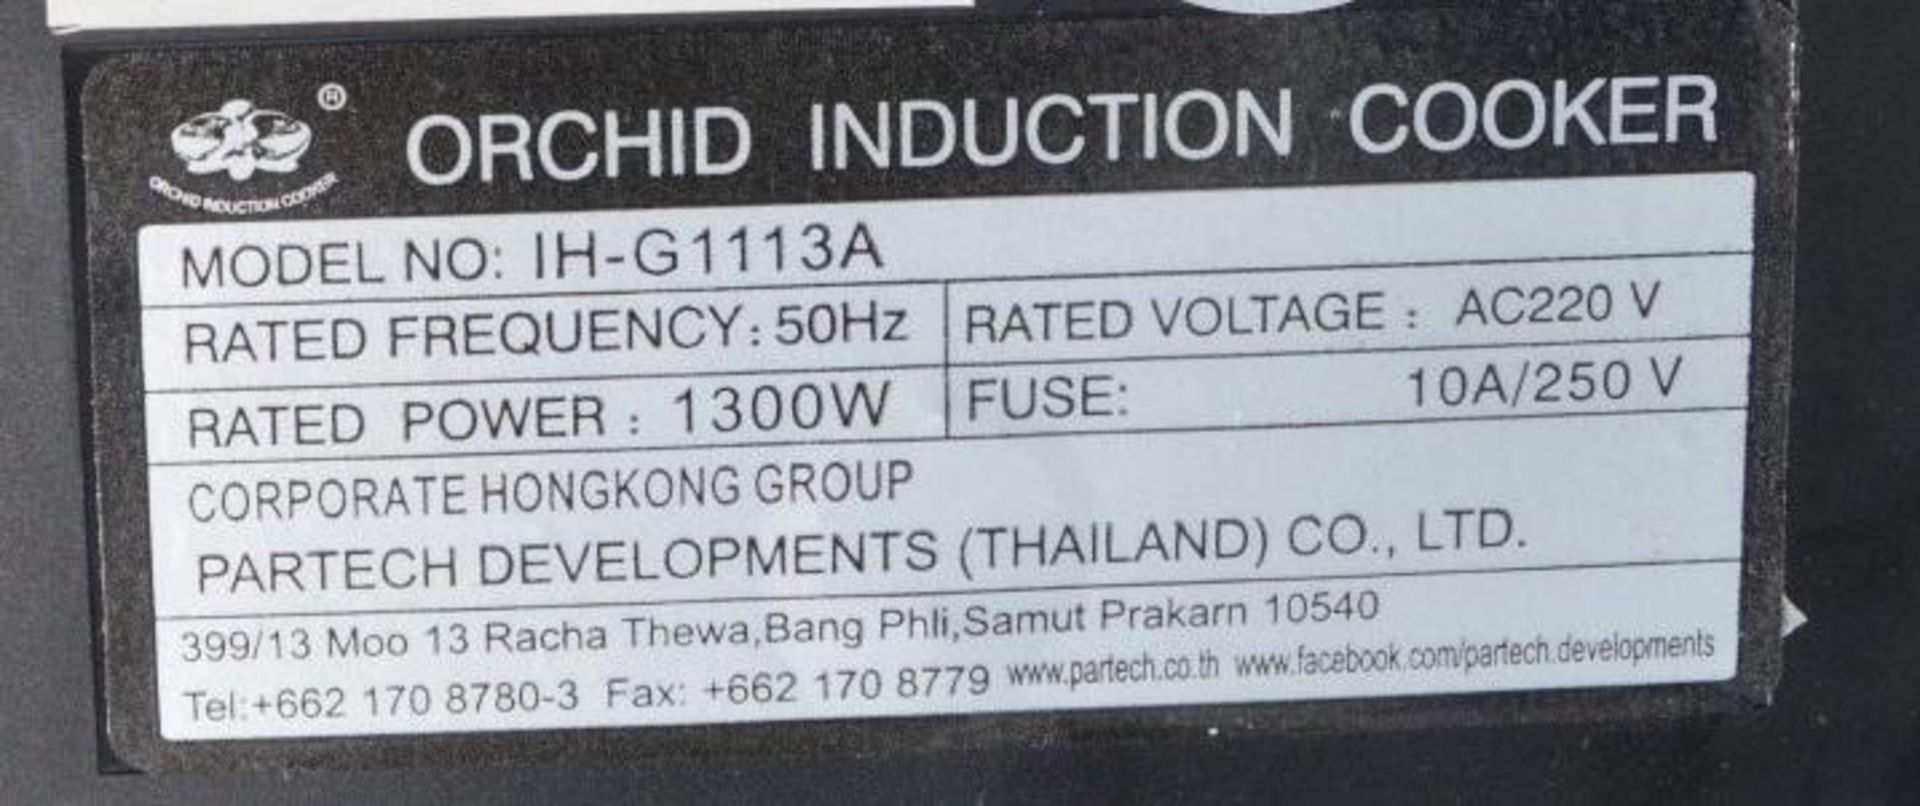 1 x Orchid IH-G1113A Induction Cooker - Pre-owned, Taken From An Asian Fusion Restaurant - Ref: MC79 - Image 3 of 4